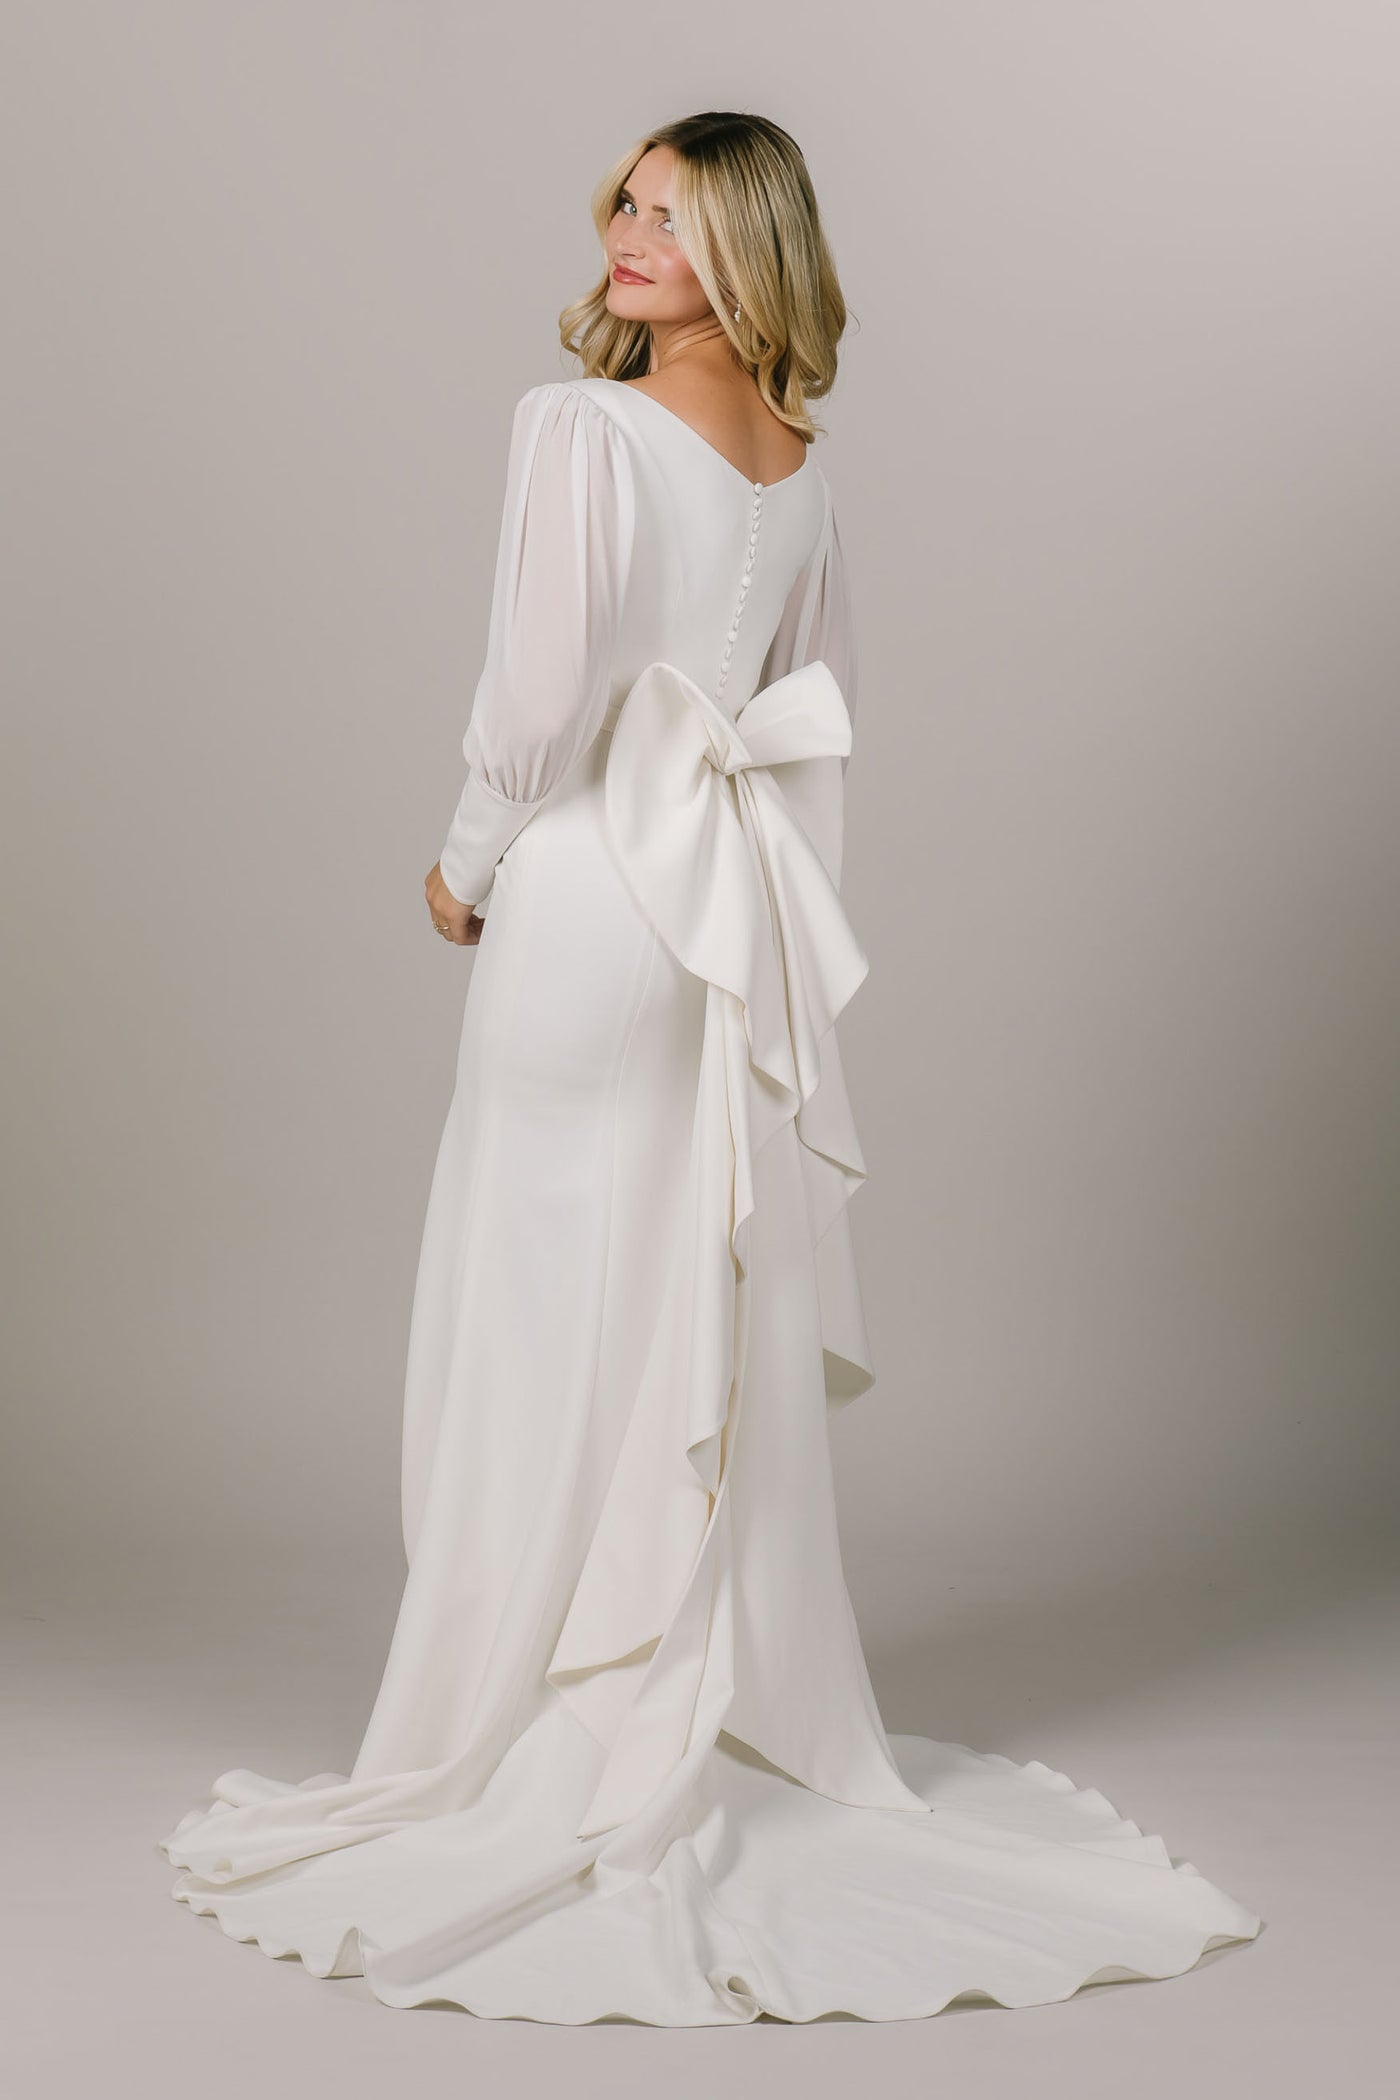 This is a back shot of a modest wedding dress with a fun bow on the back and sheer chiffon sleeves.